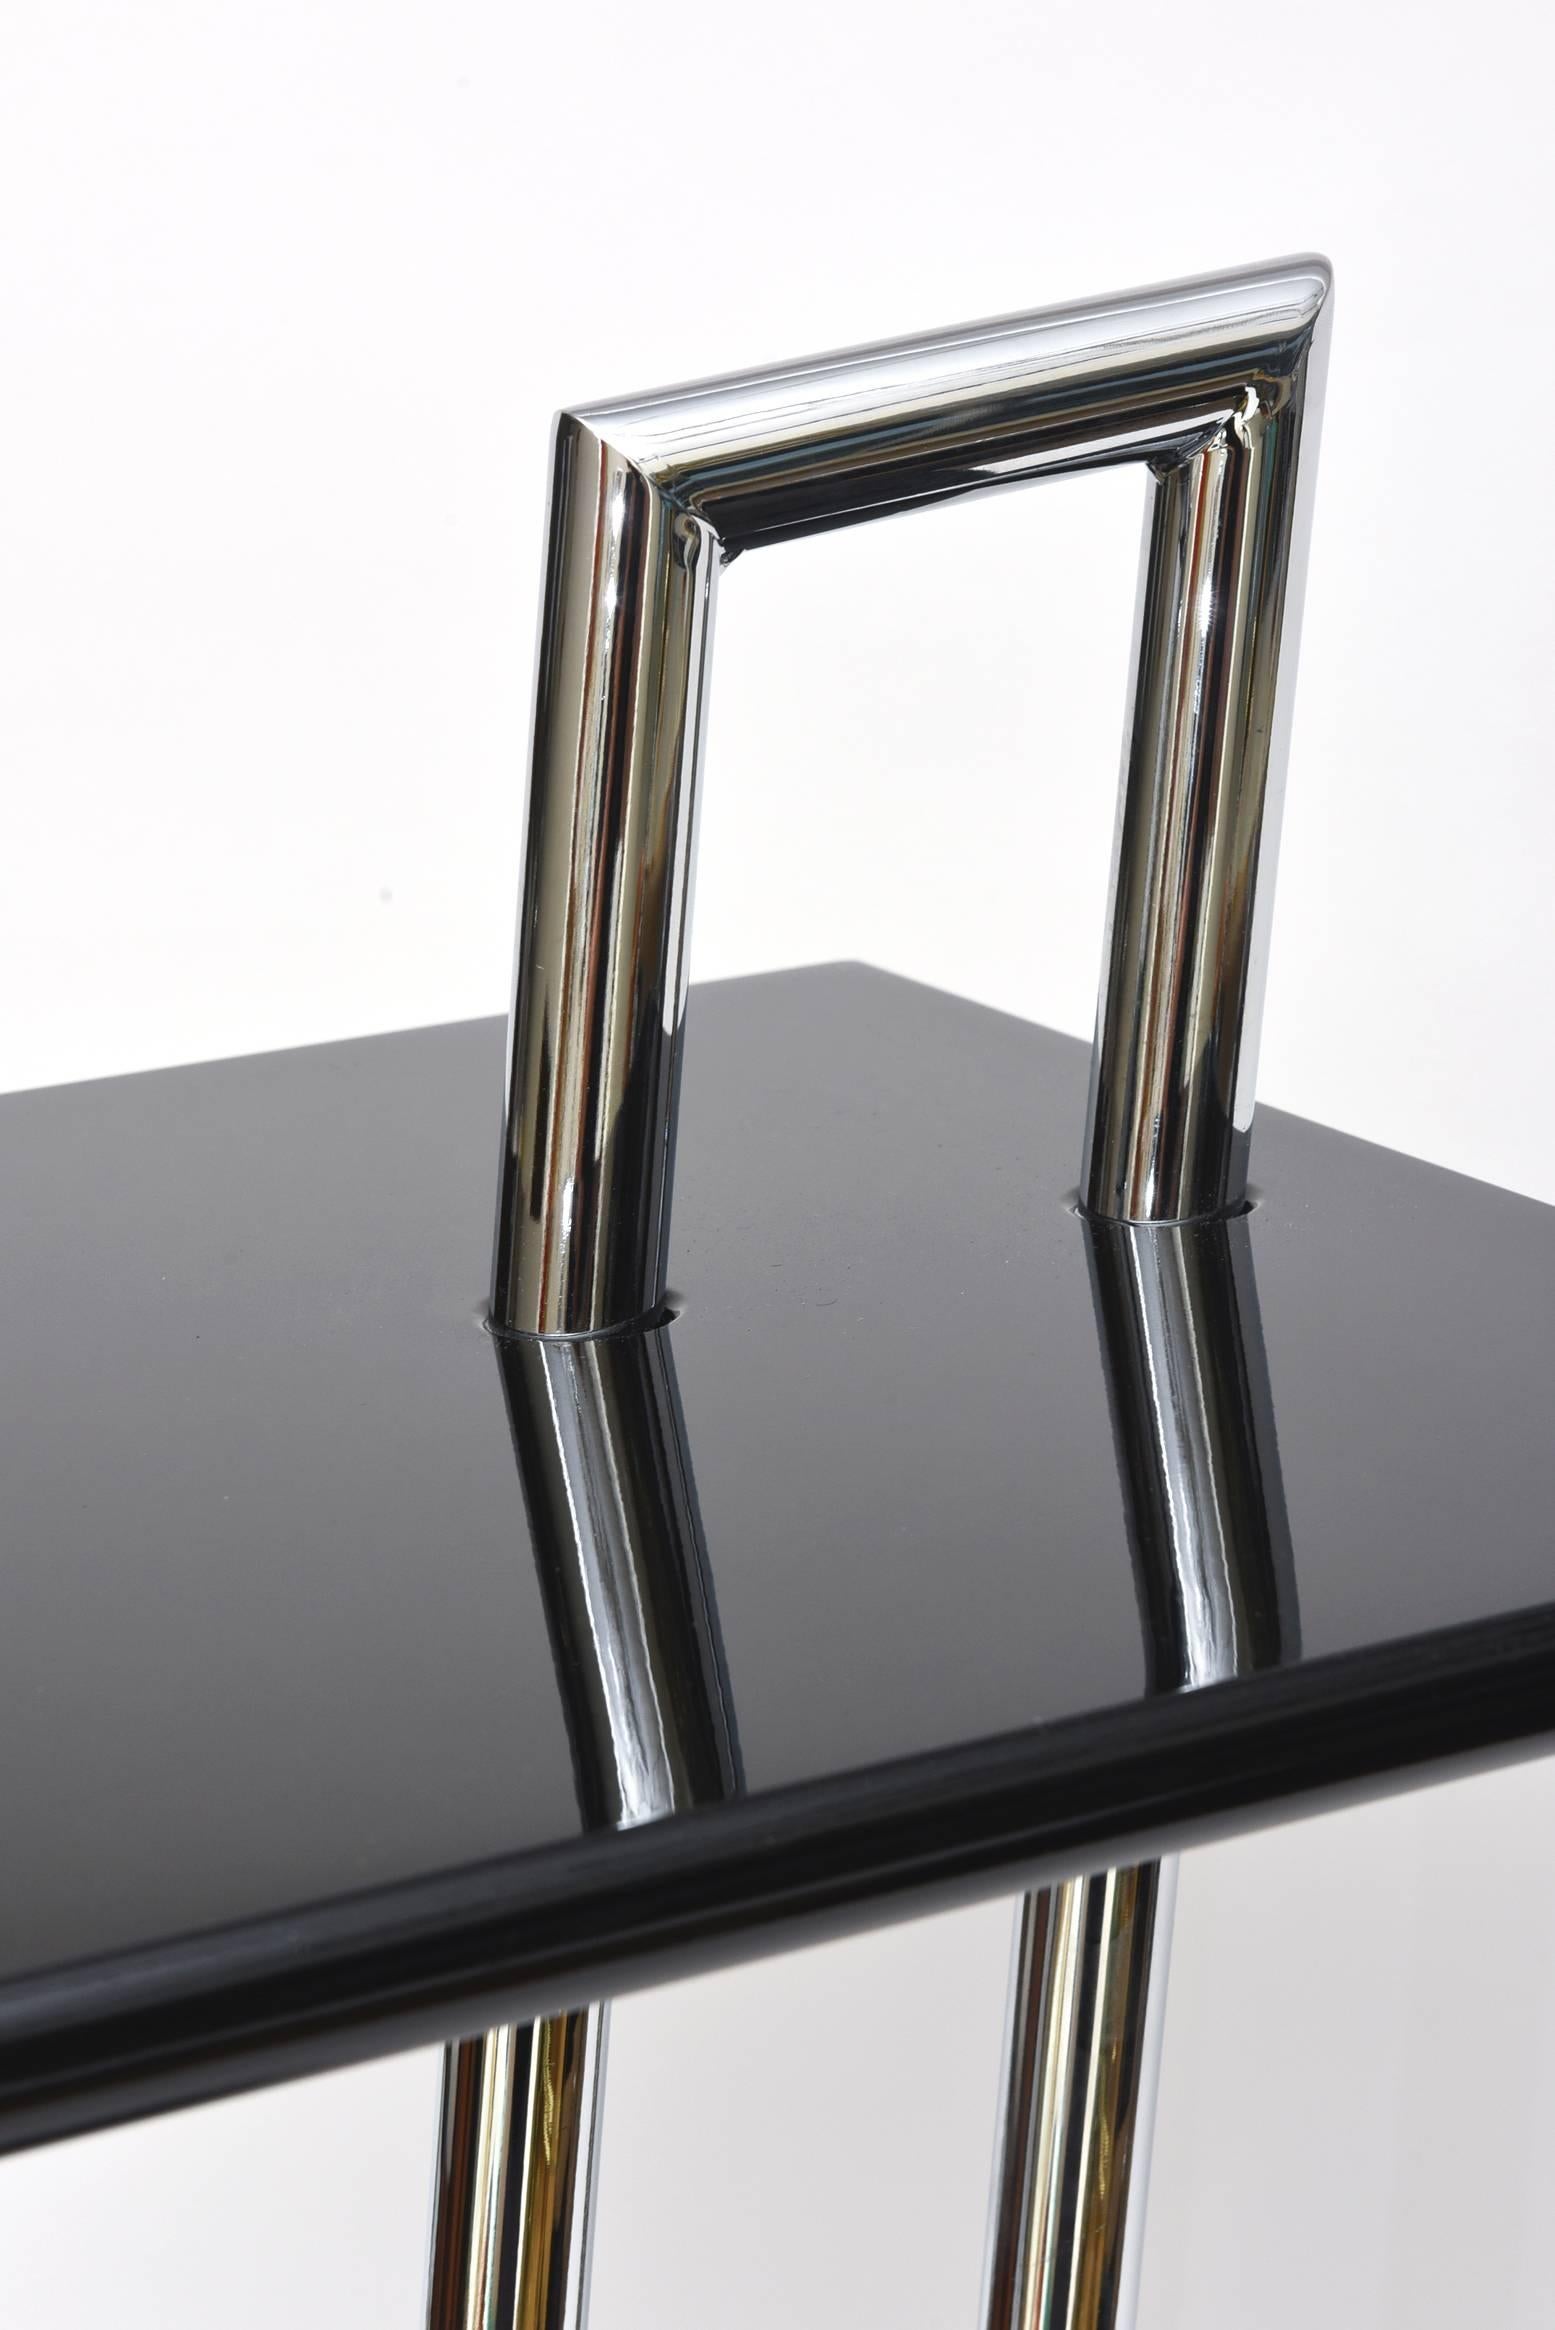  Eileen Gray Second Edition Black Lacquer Wood and Chrome Side Tables/ SALE 4